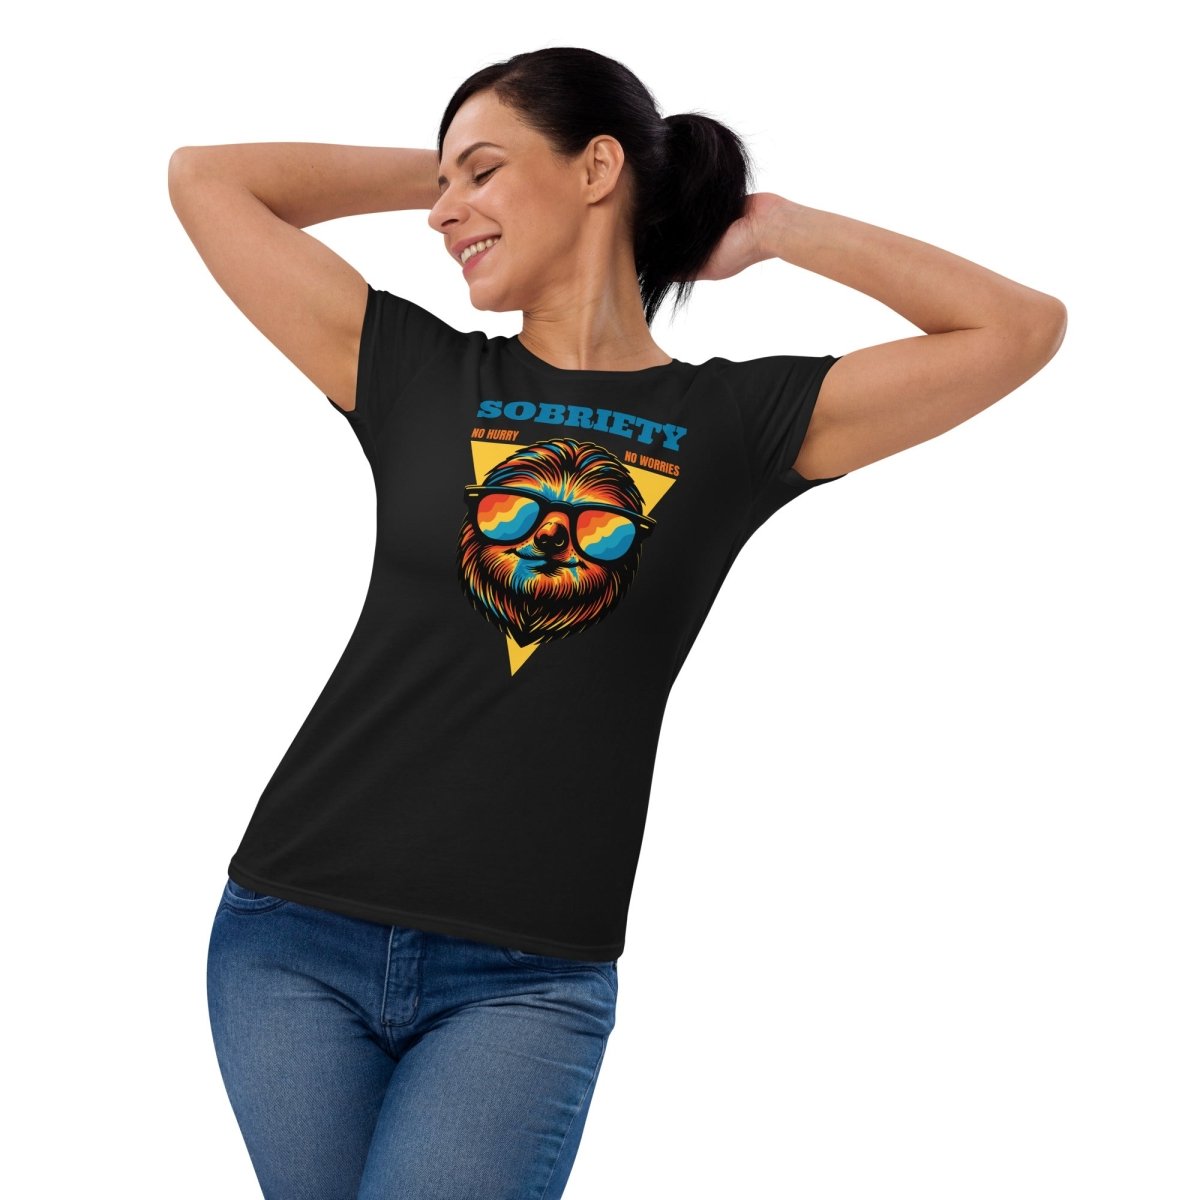 Chill Vibes Sobriety Women's Fashion Fit Tee - | Sobervation